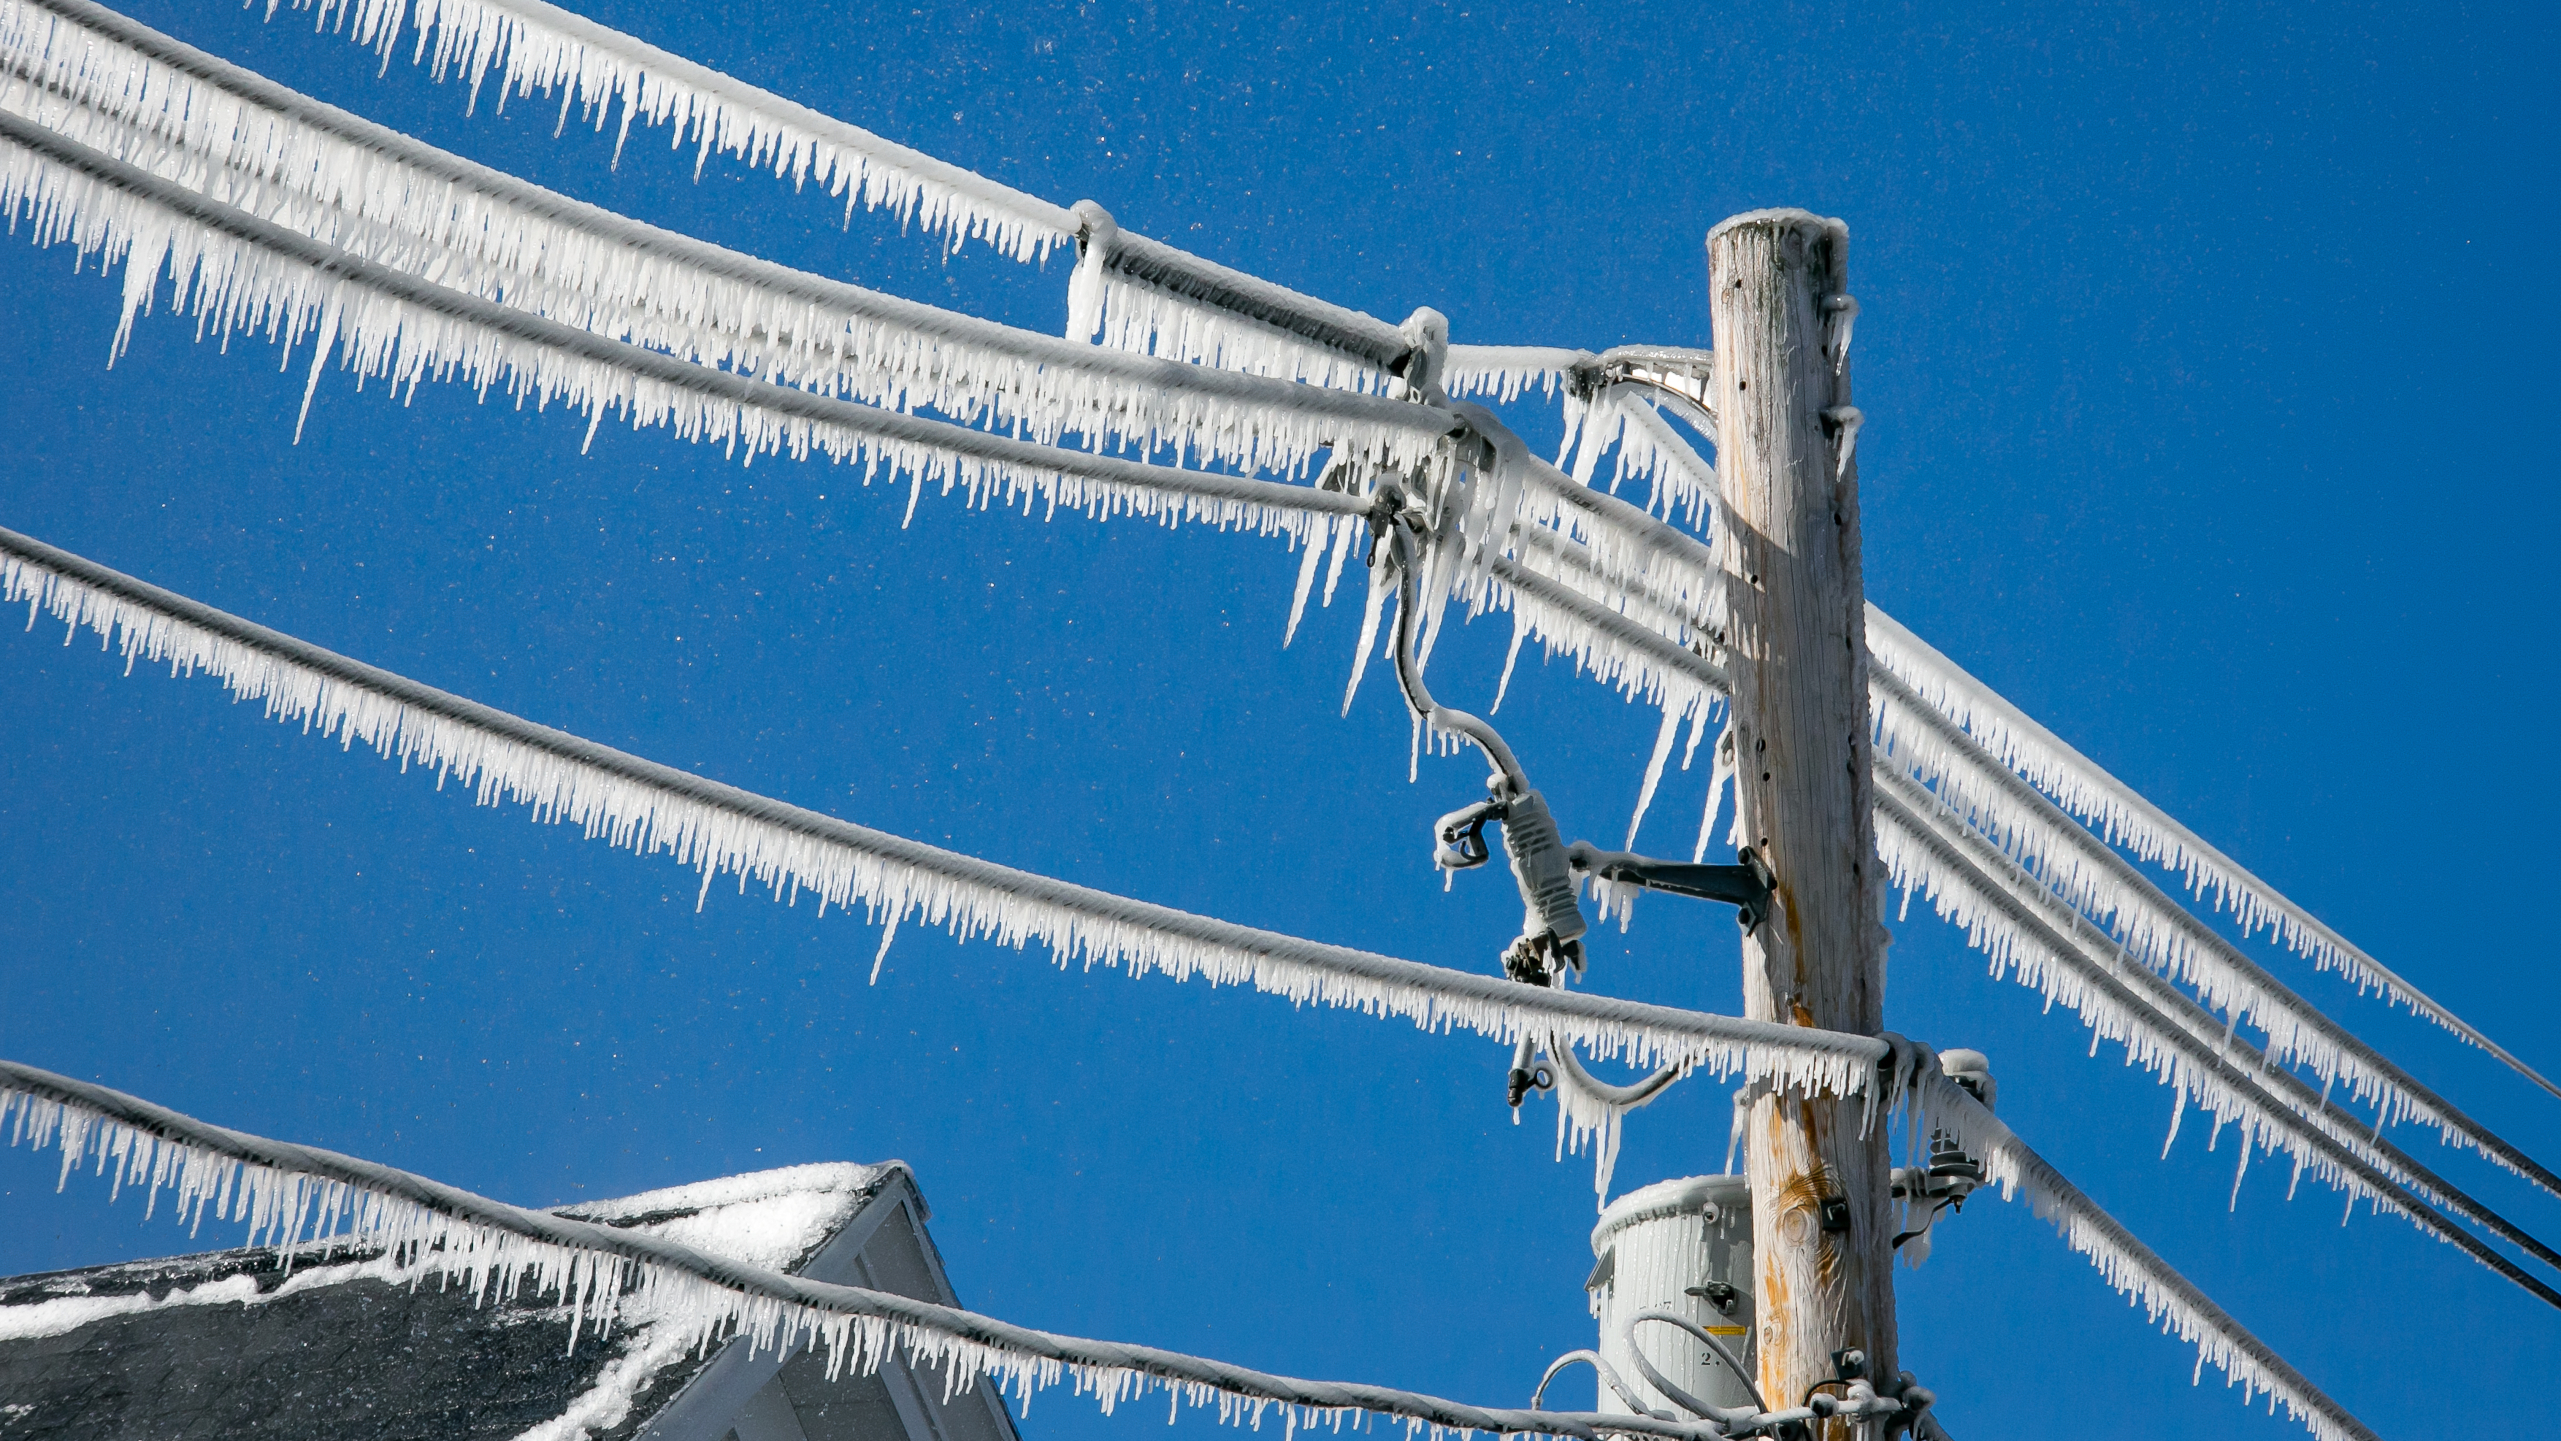 Powerlines frozen during a winter storm